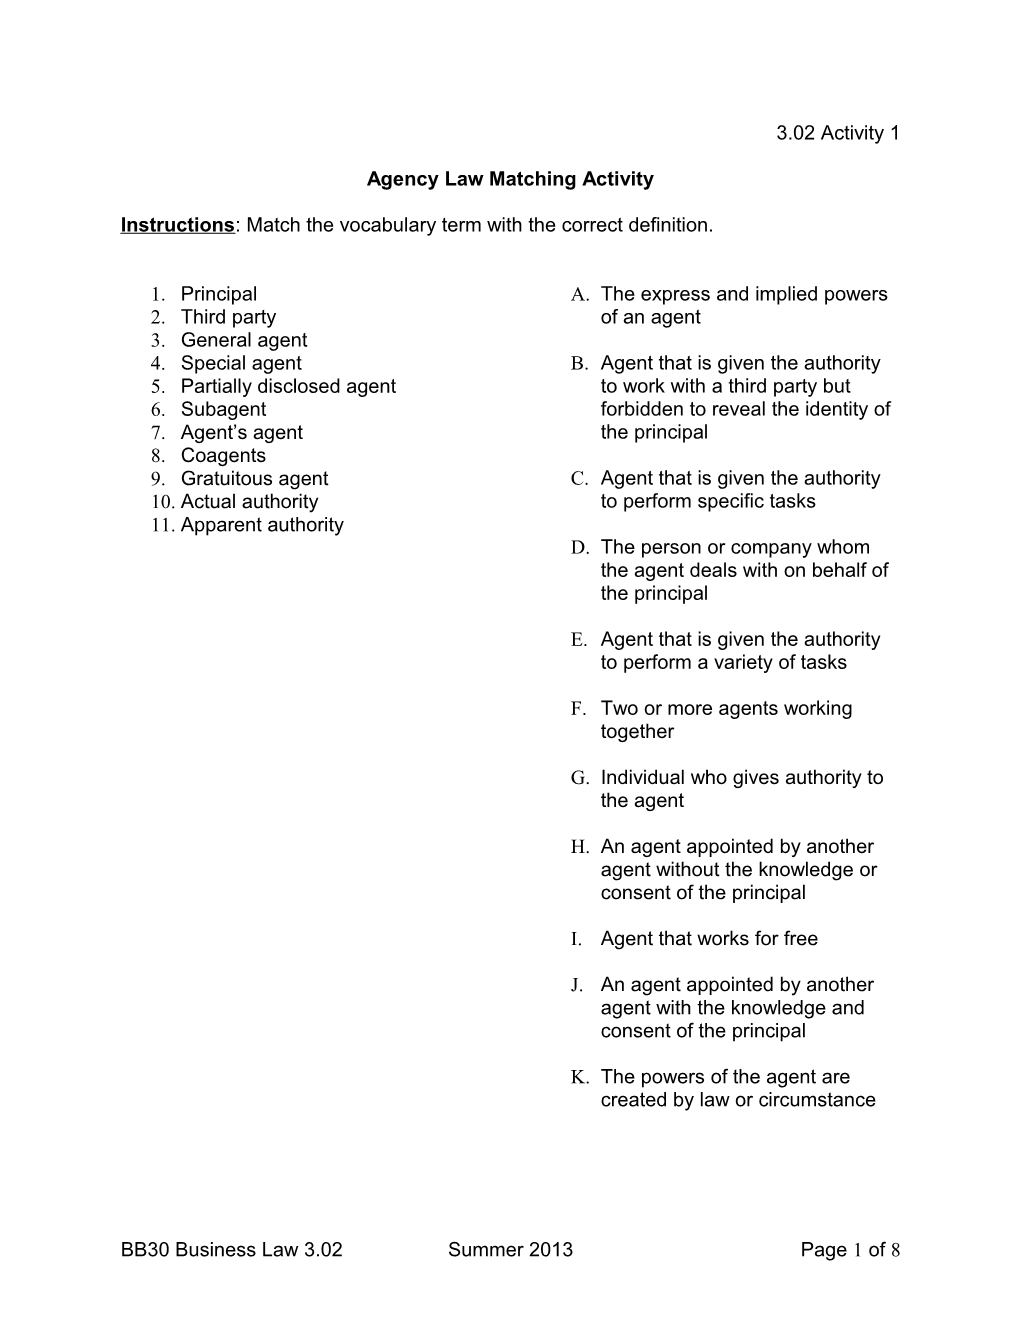 Agency Law Matching Activity